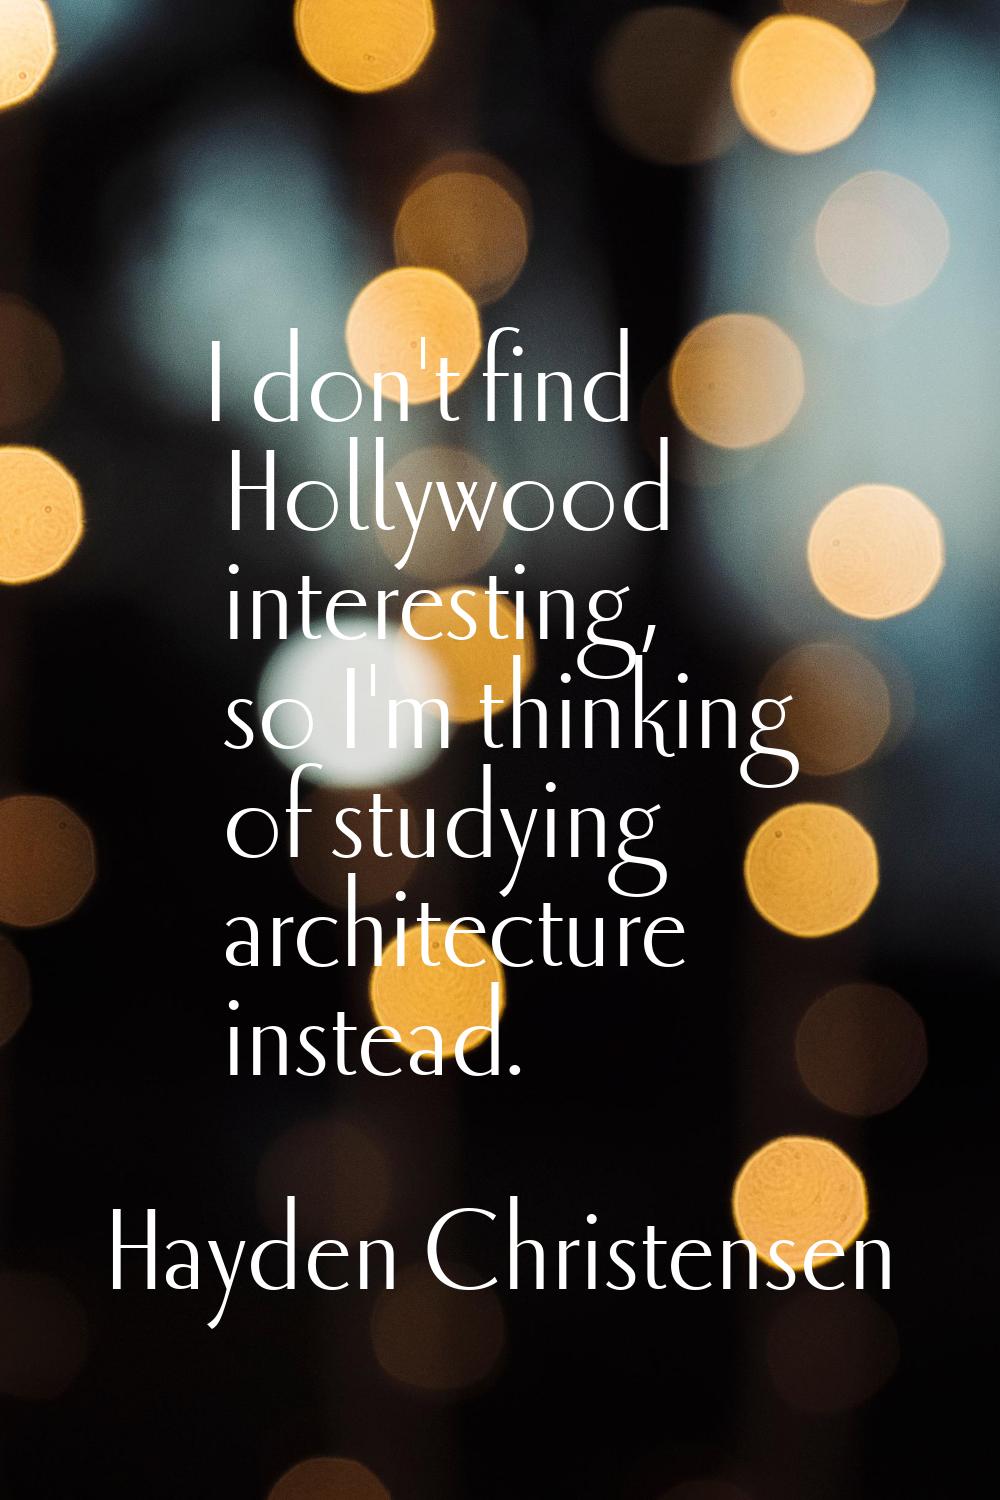 I don't find Hollywood interesting, so I'm thinking of studying architecture instead.